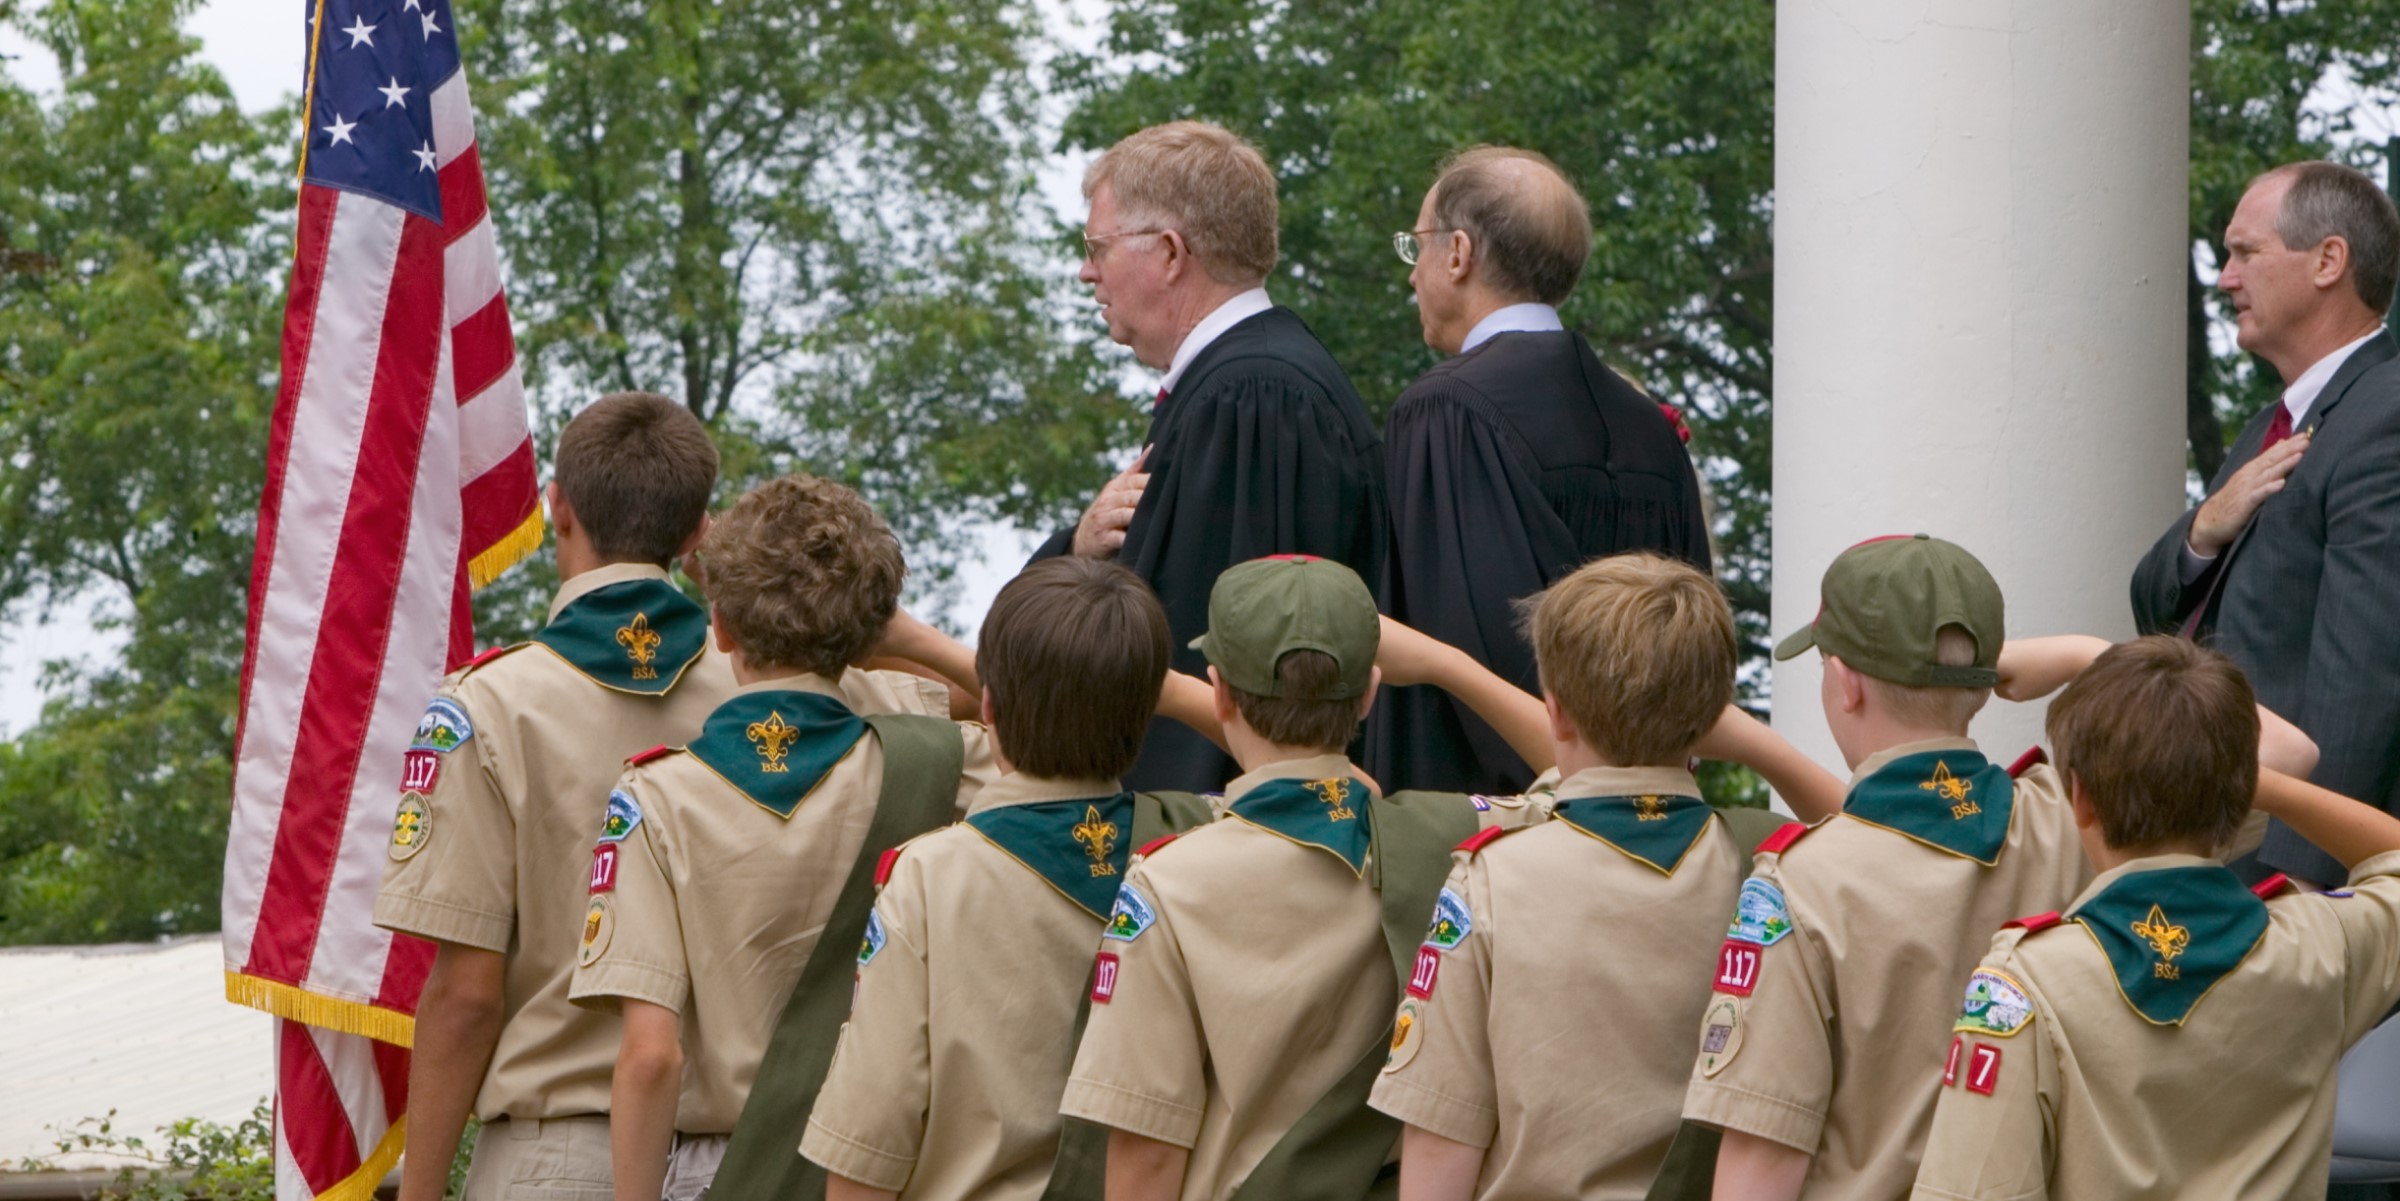 An Elegy for the Boy Scouts – Mark Pulliam